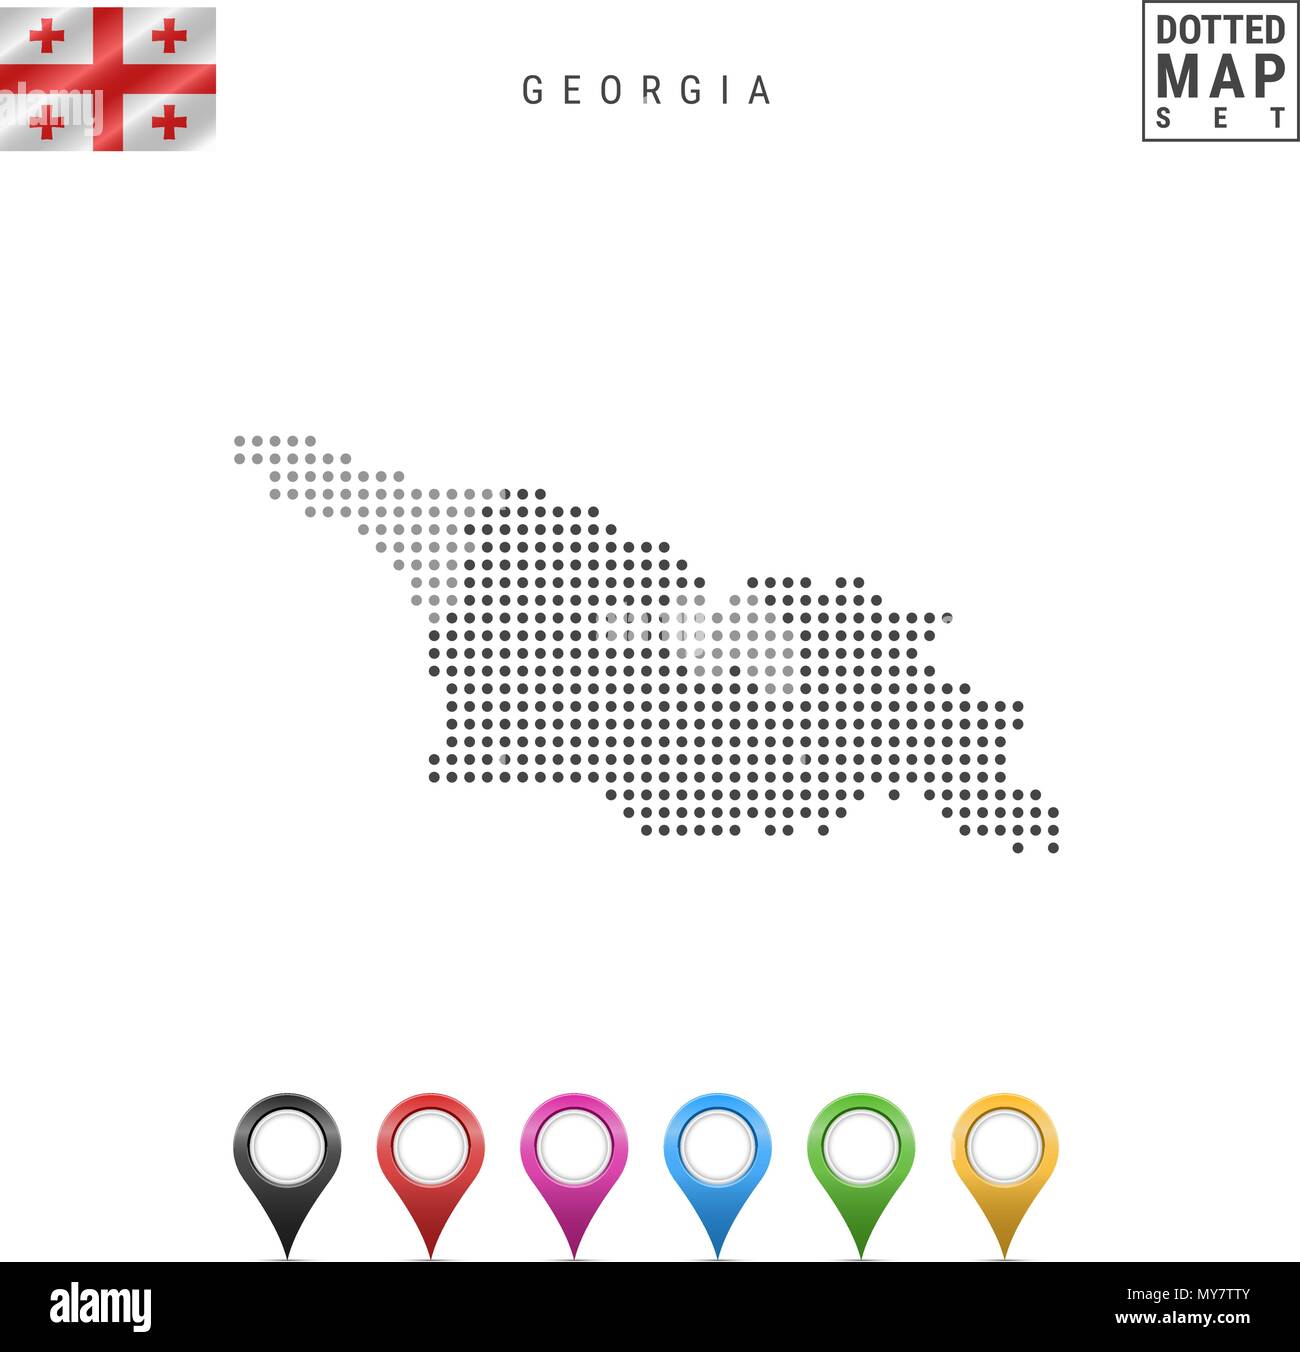 Vector Dotted Map of Georgia. Simple Silhouette of Georgia. National Flag of Georgia. Set of Multicolored Map Markers Stock Vector